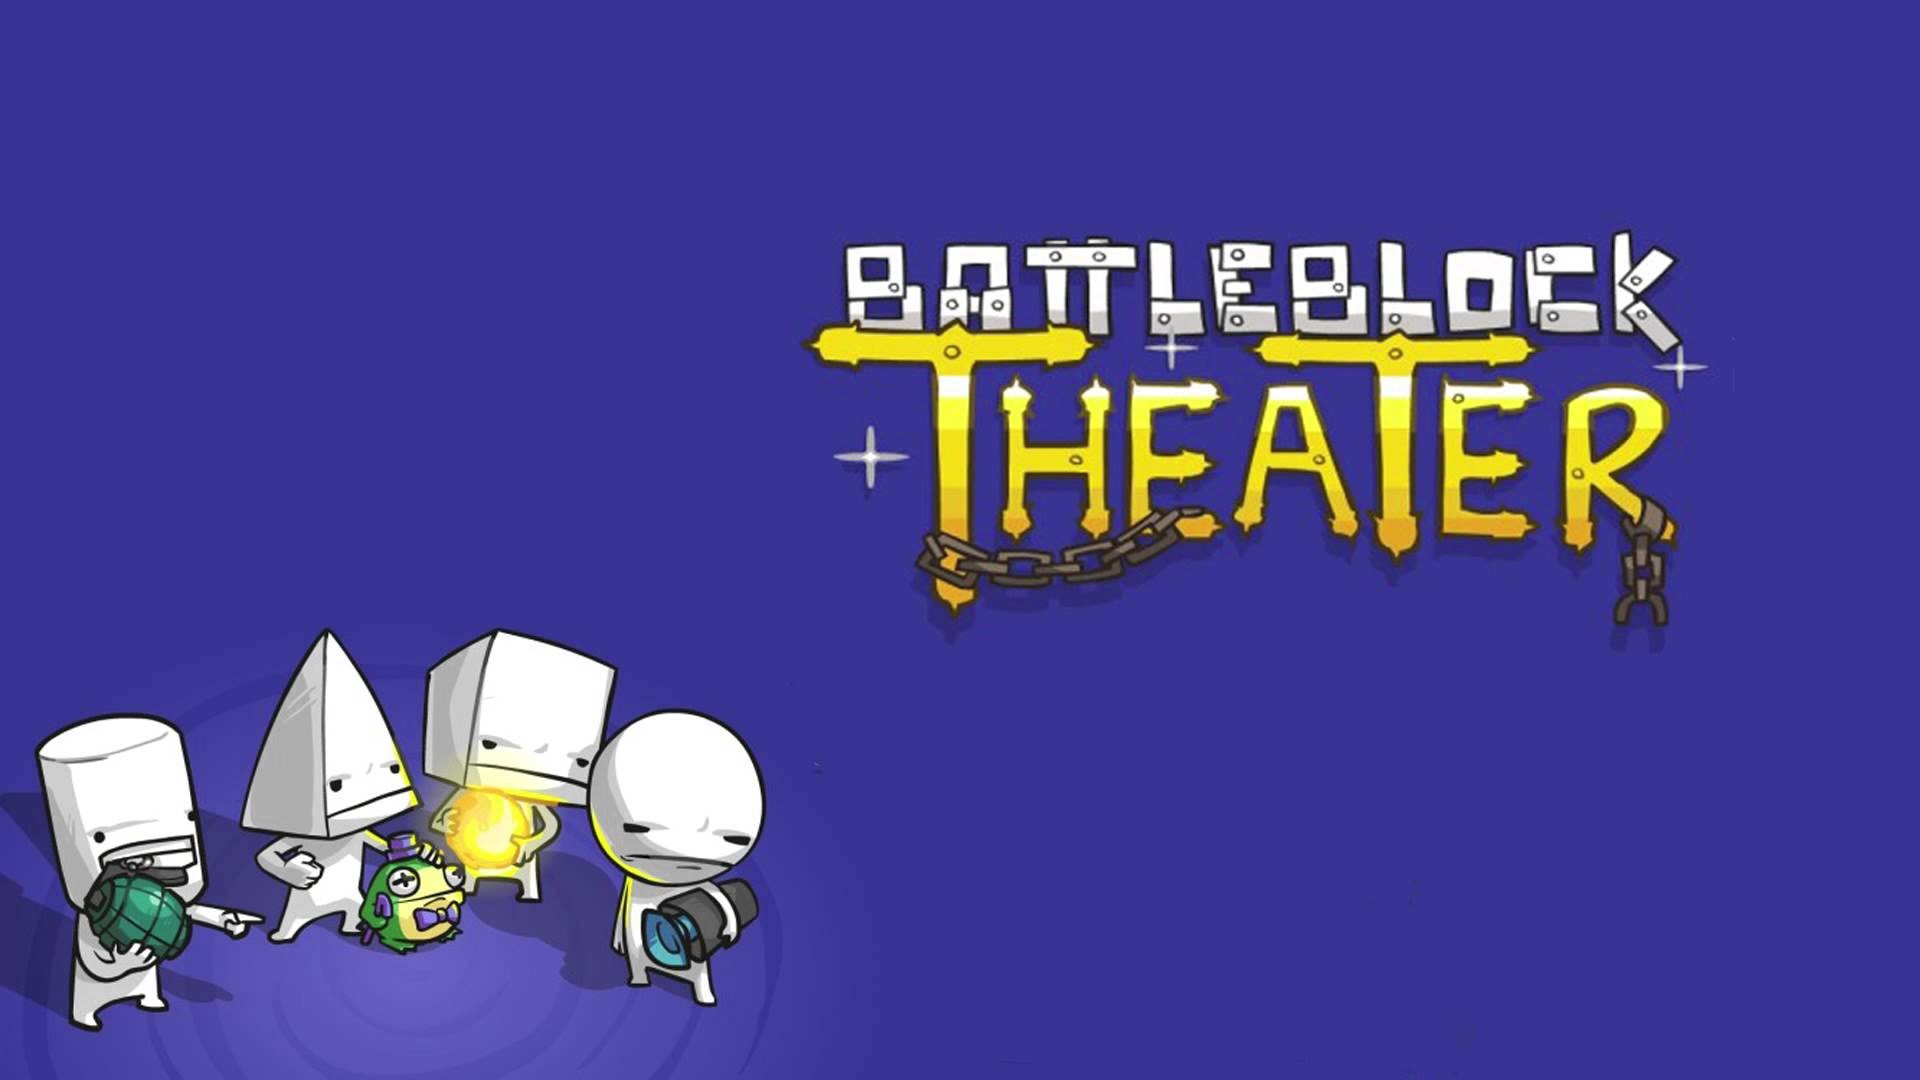 Its a secret song from Battleblock Theater This music plays in Secret Areas / Levels